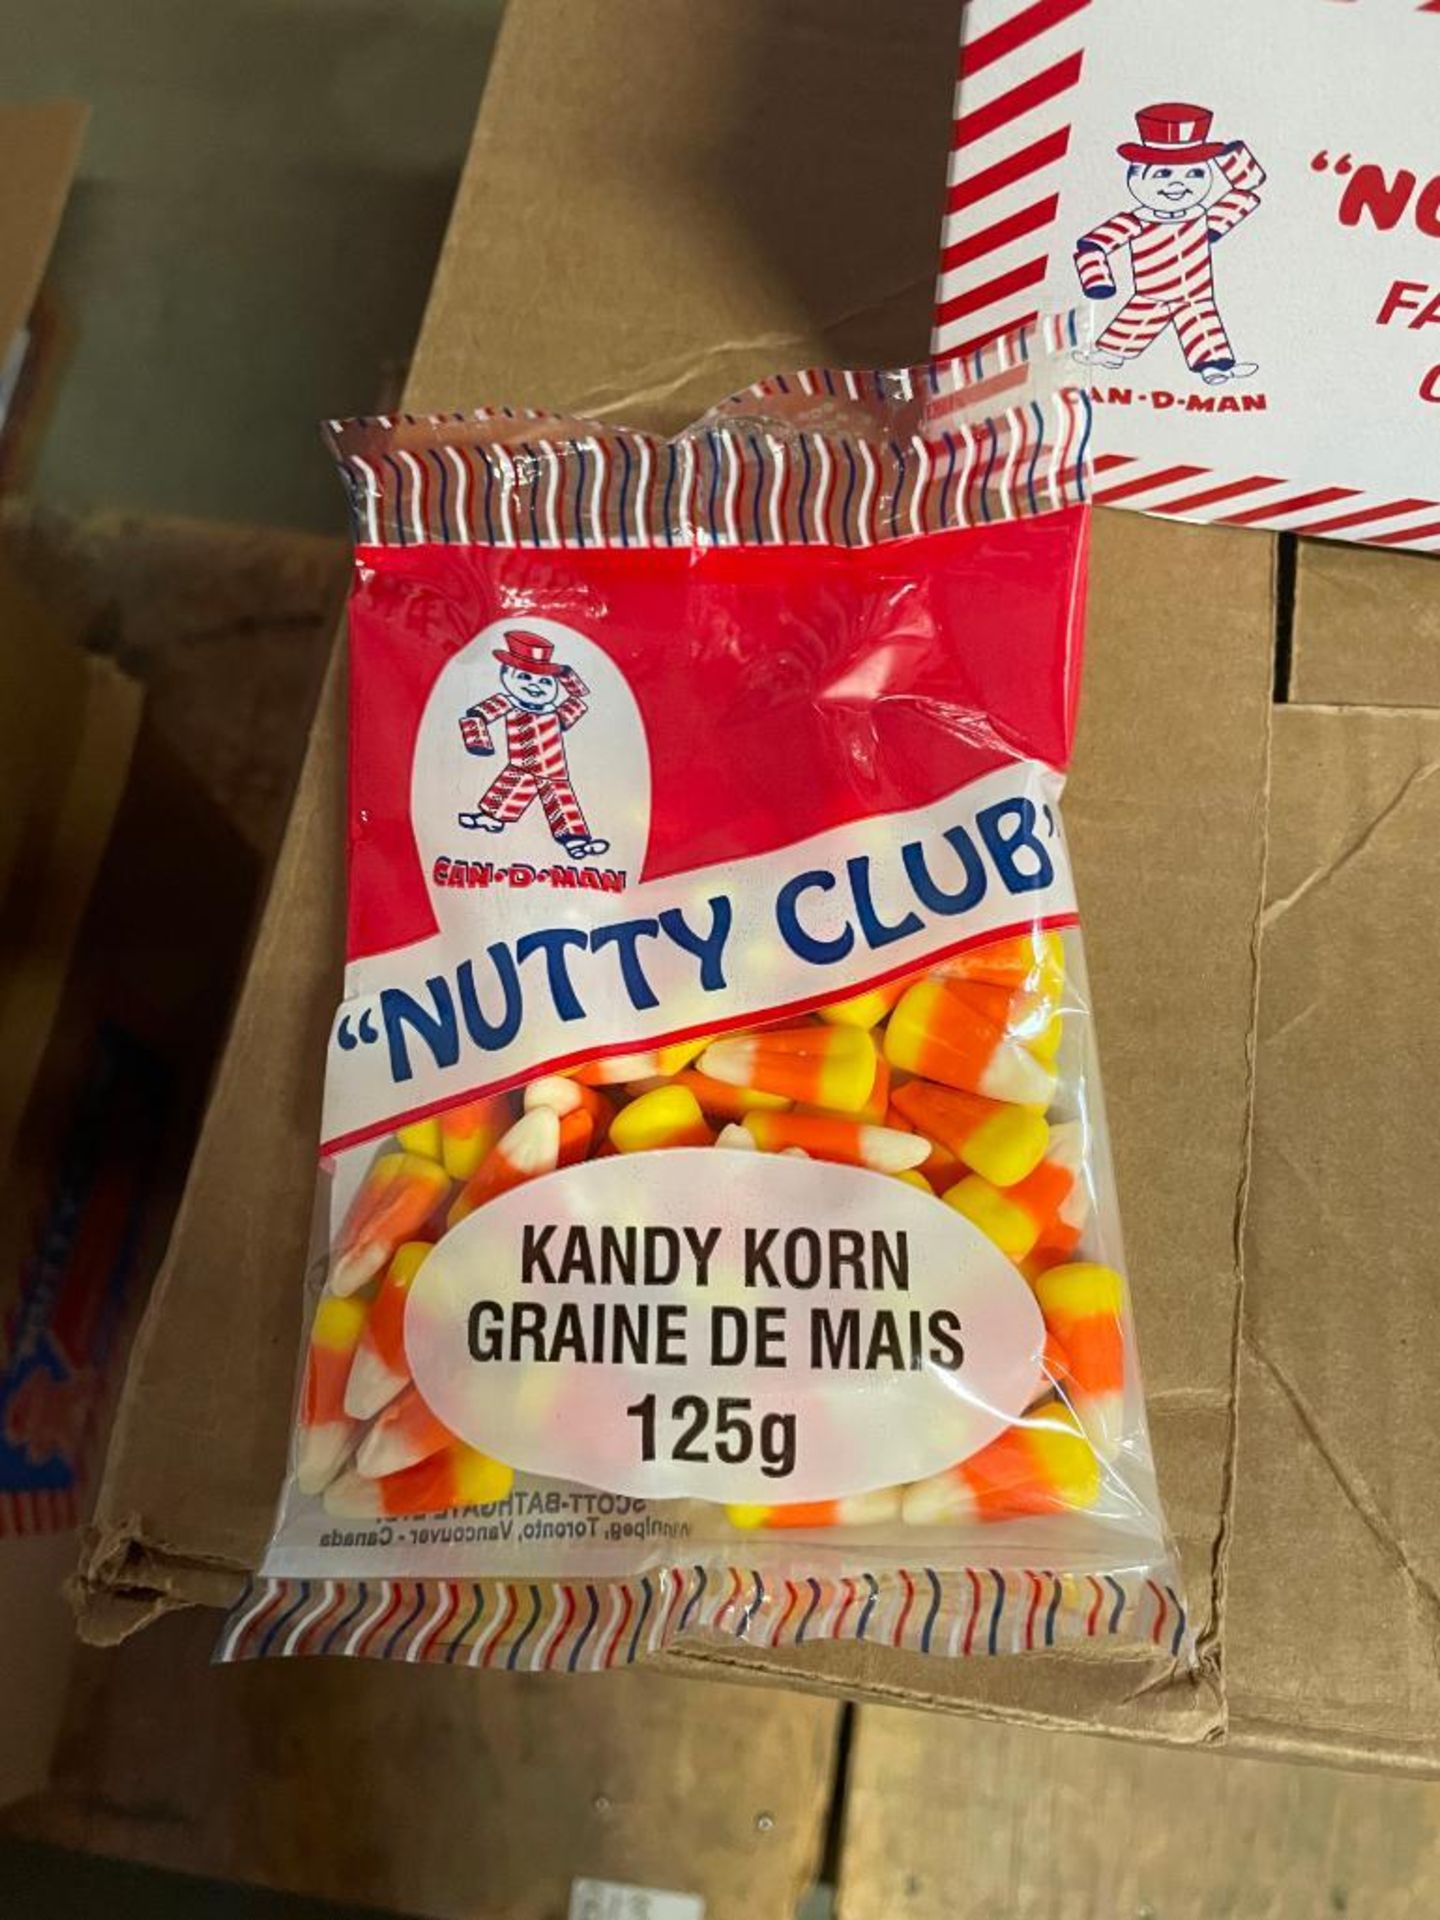 (3) CASES OF NUTTY CLUB KANDY KORN, 12/12/125G PER CASE - Image 3 of 3